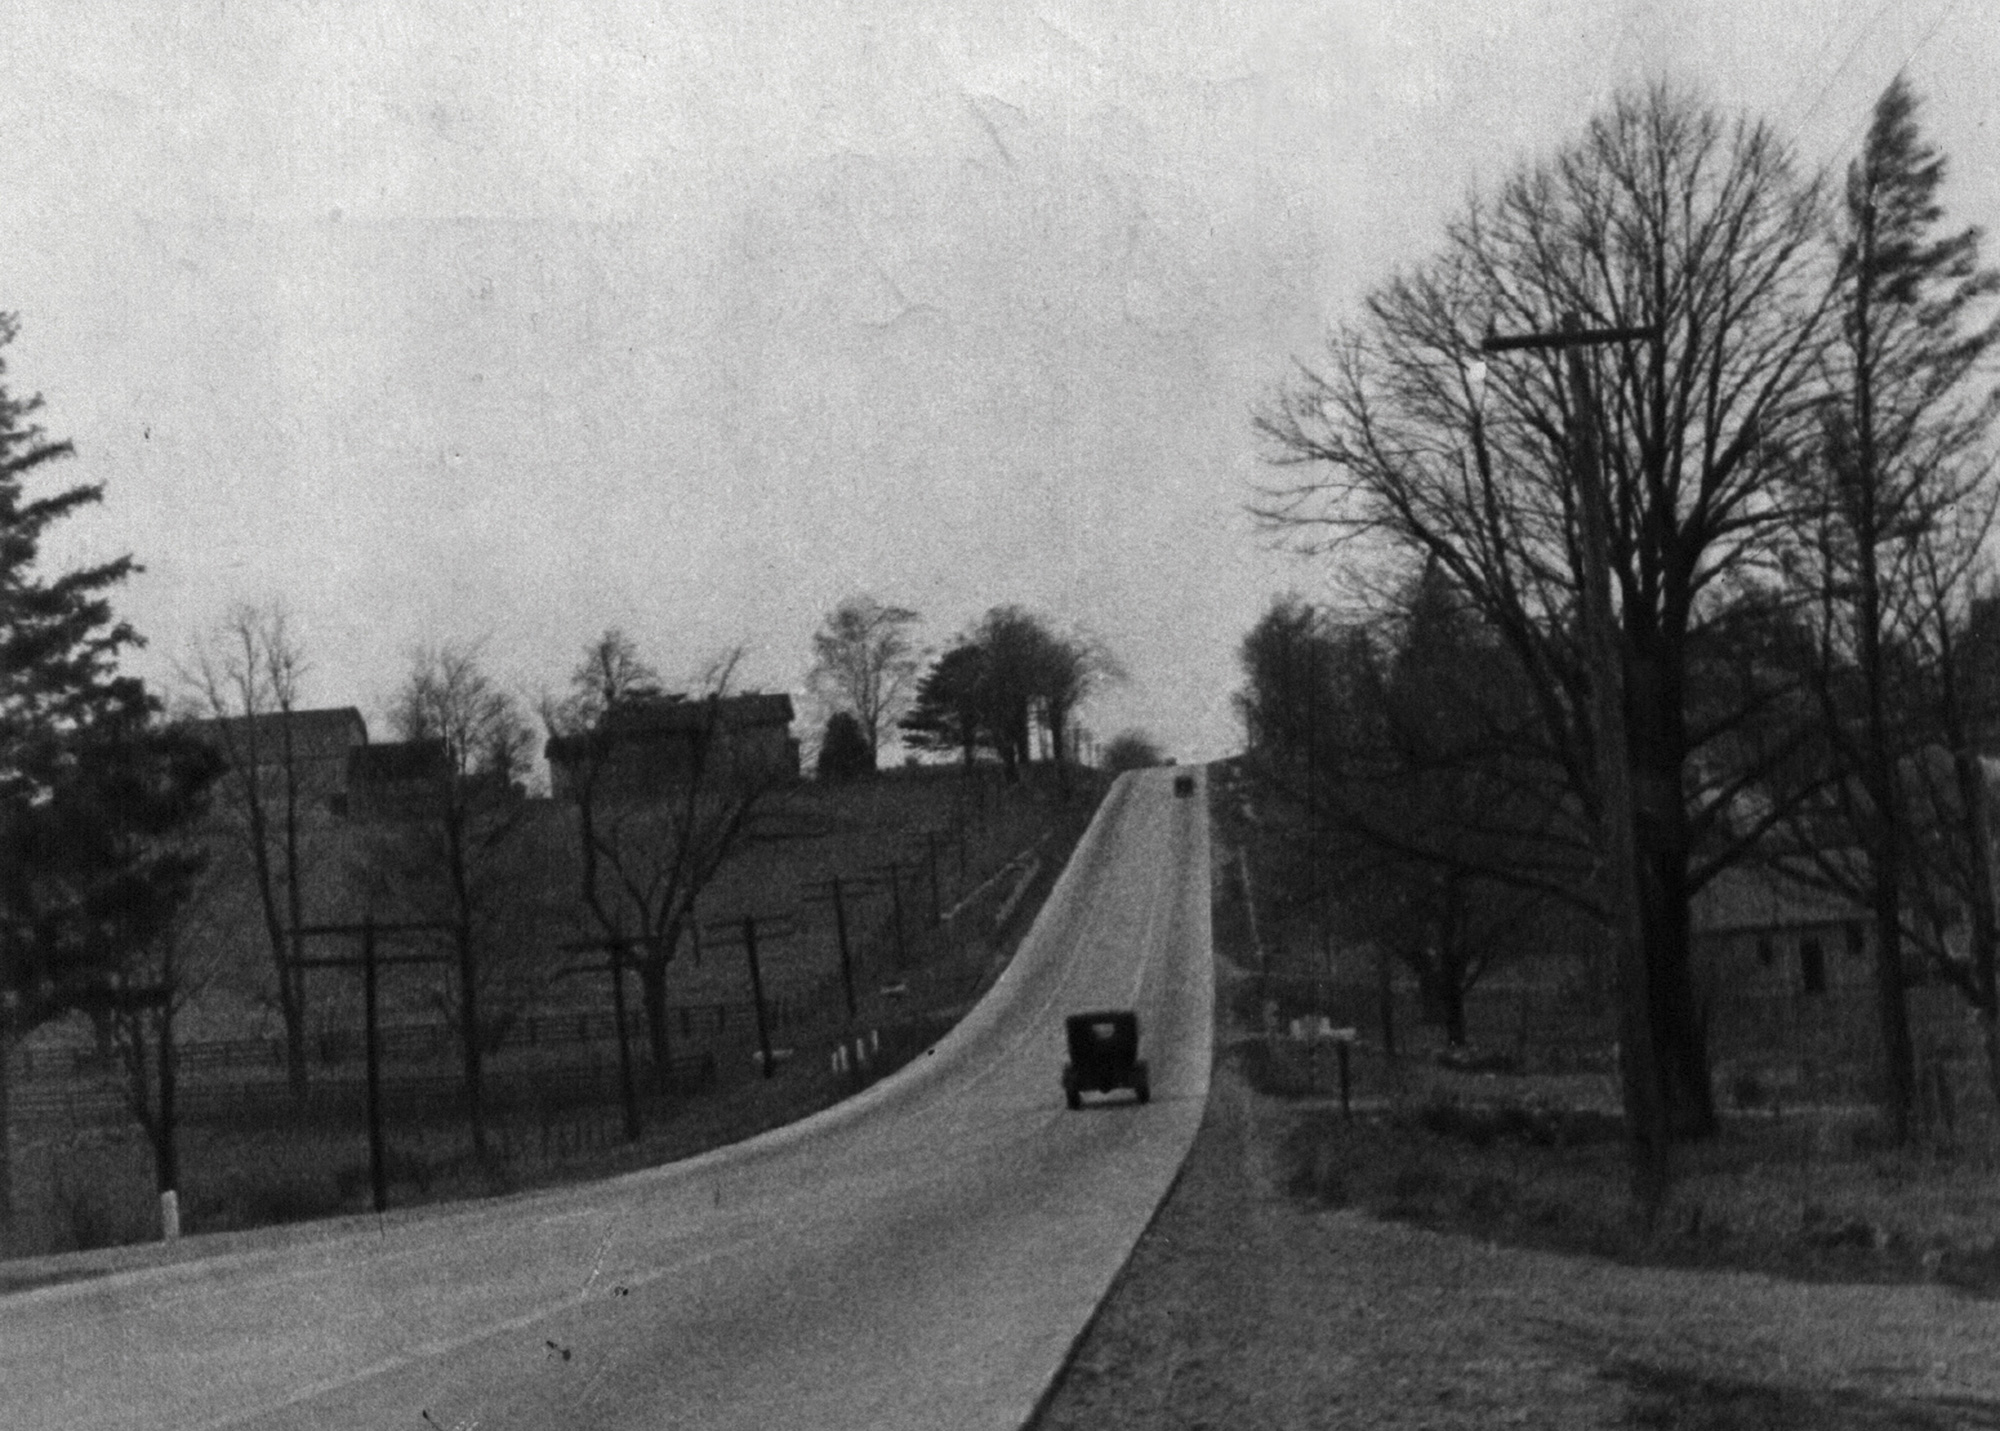 1935 black-and-white photograph by Ilya Ilf of a road through the country.